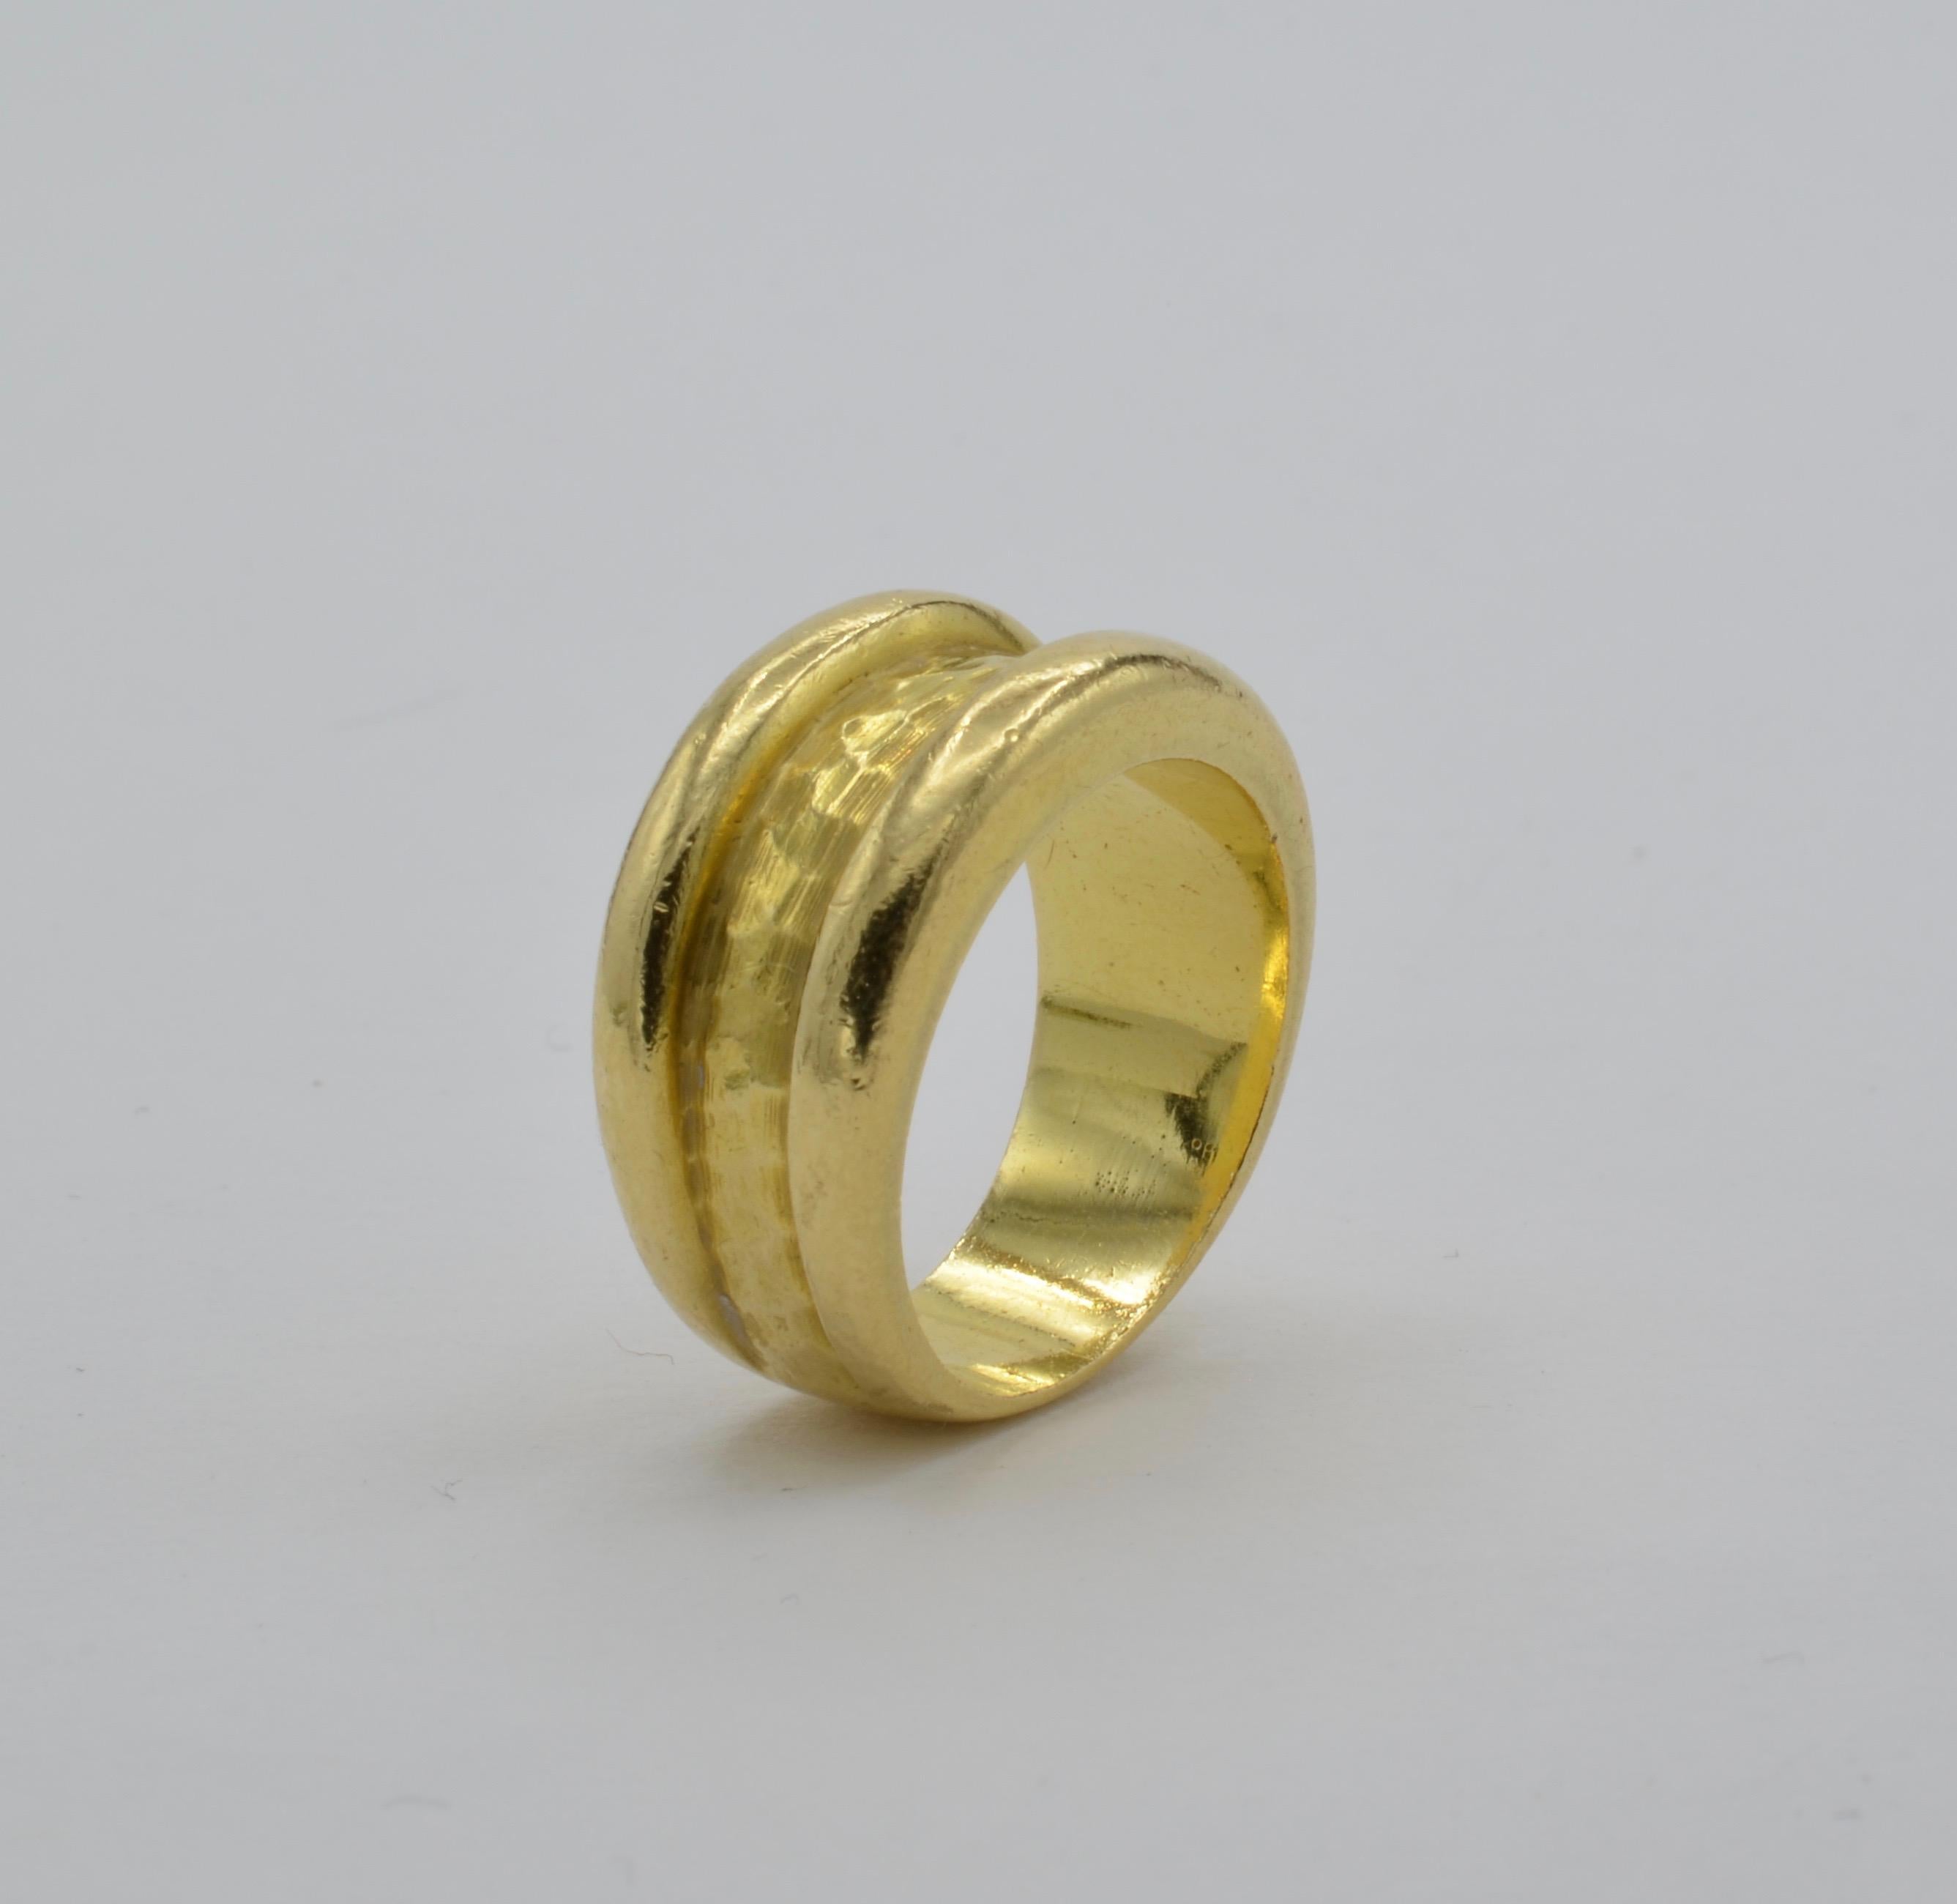 This substantial 18k gold ring has a beautiful hammered textured band in the middle creating an artistic and timeless look. Tapered in the back the ring blends together. The ring is a size 7 and can be sized to fit your finger.